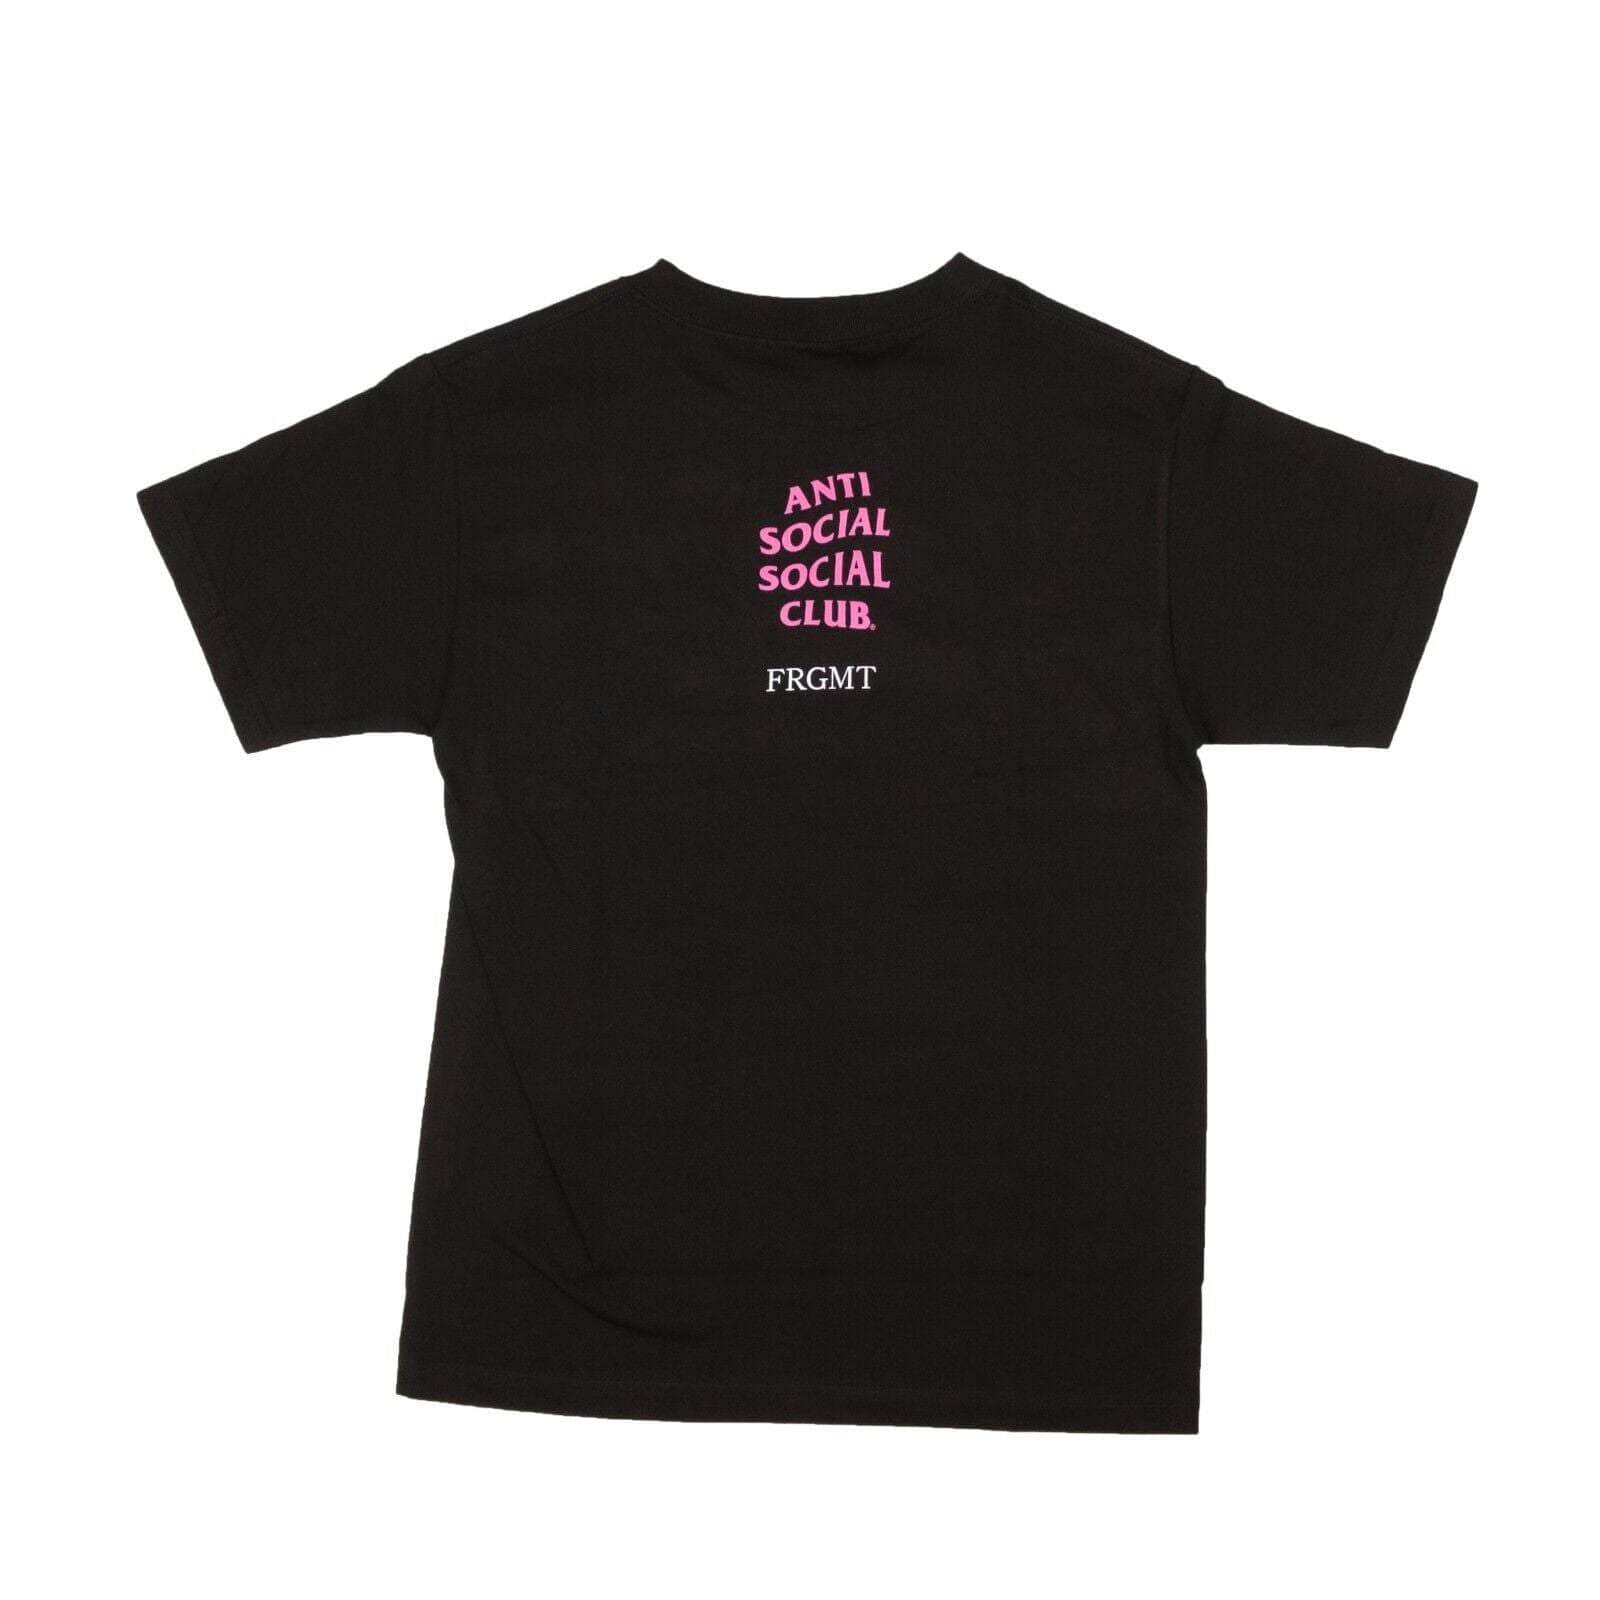 Anti Social Social Club anti-social-social-club, channelenable-all, chicmi, couponcollection, gender-mens, main-clothing, mens-shoes, size-l, size-m, size-s, size-xl, under-250 Black Cotton Interference Logo T-Shirt